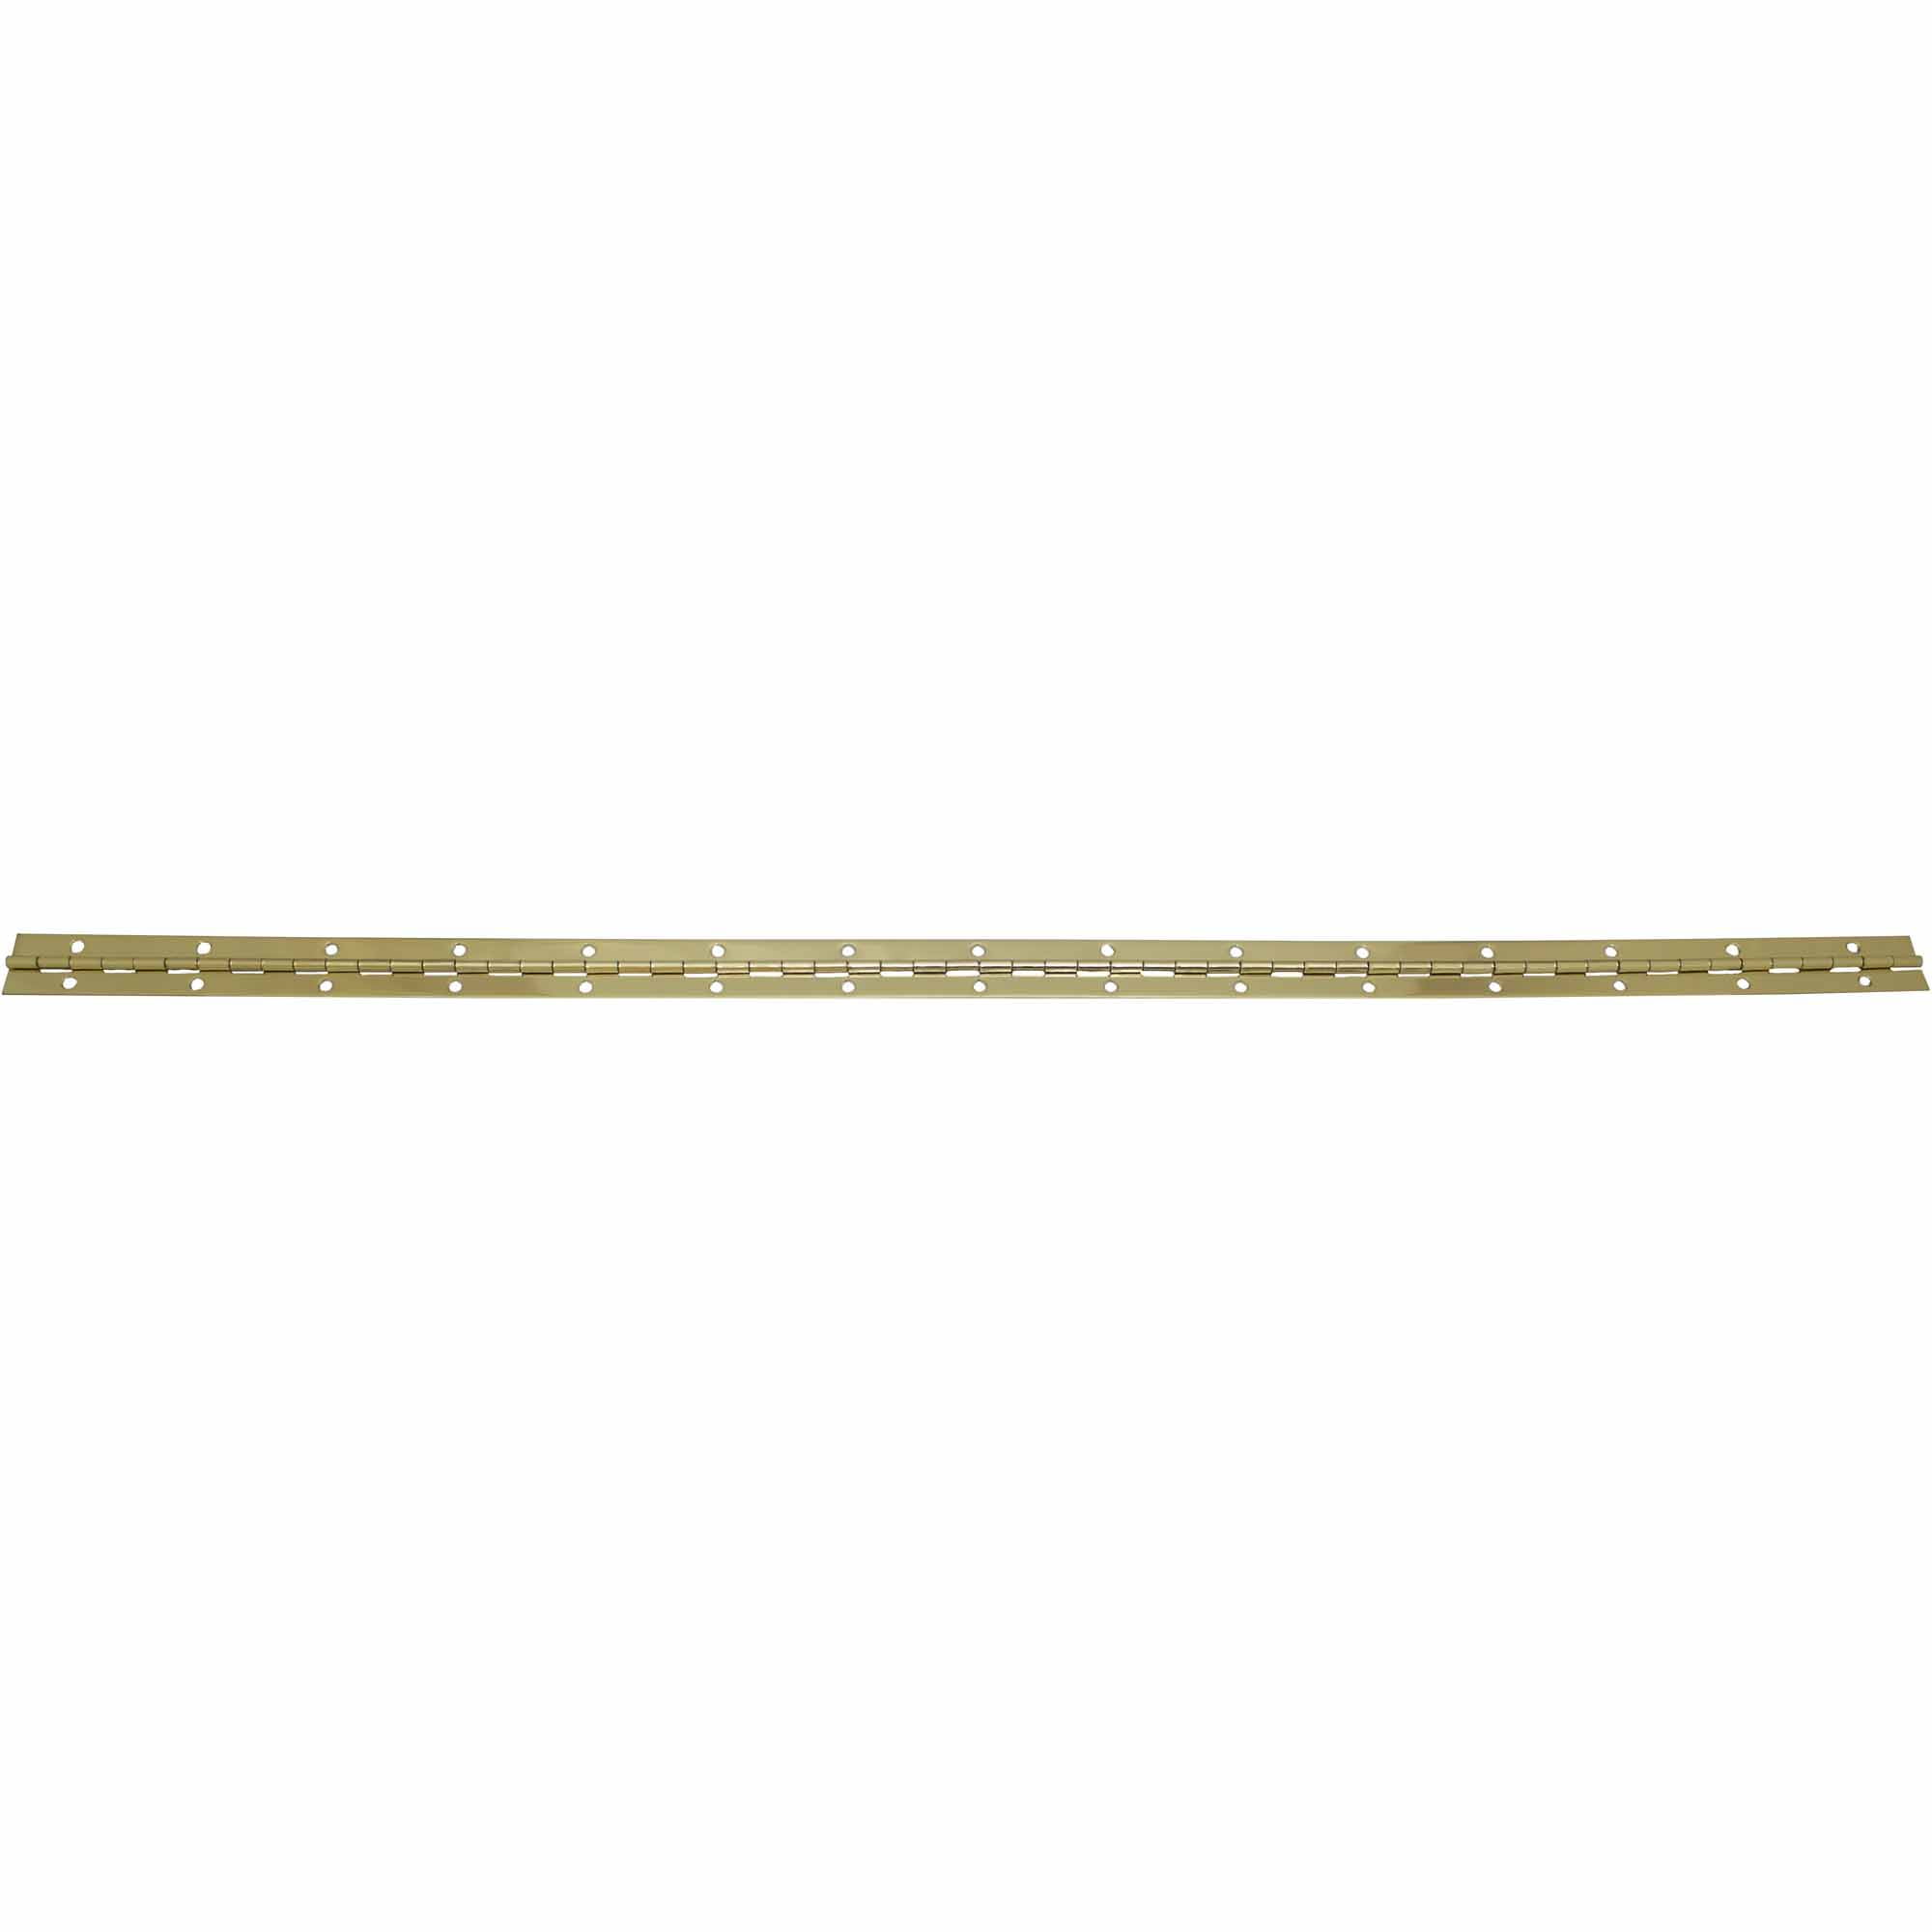 Continuous Piano Hinge Brass 1 1/16 inches by 30 inches 